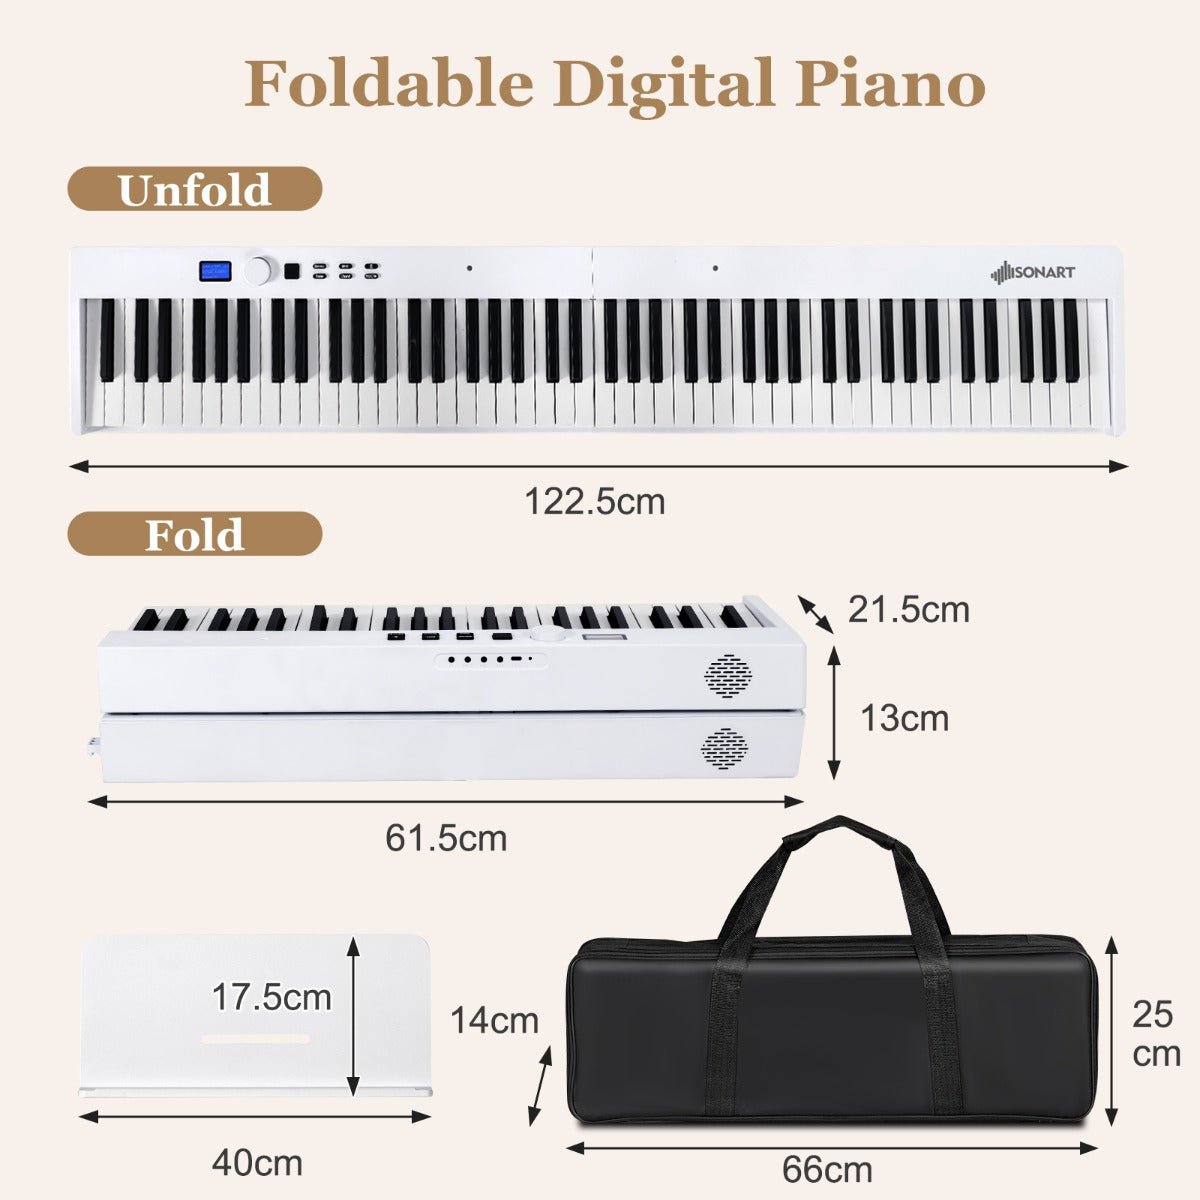 Explore Musical Creativity with the 88-Key Foldable Digital Piano in White